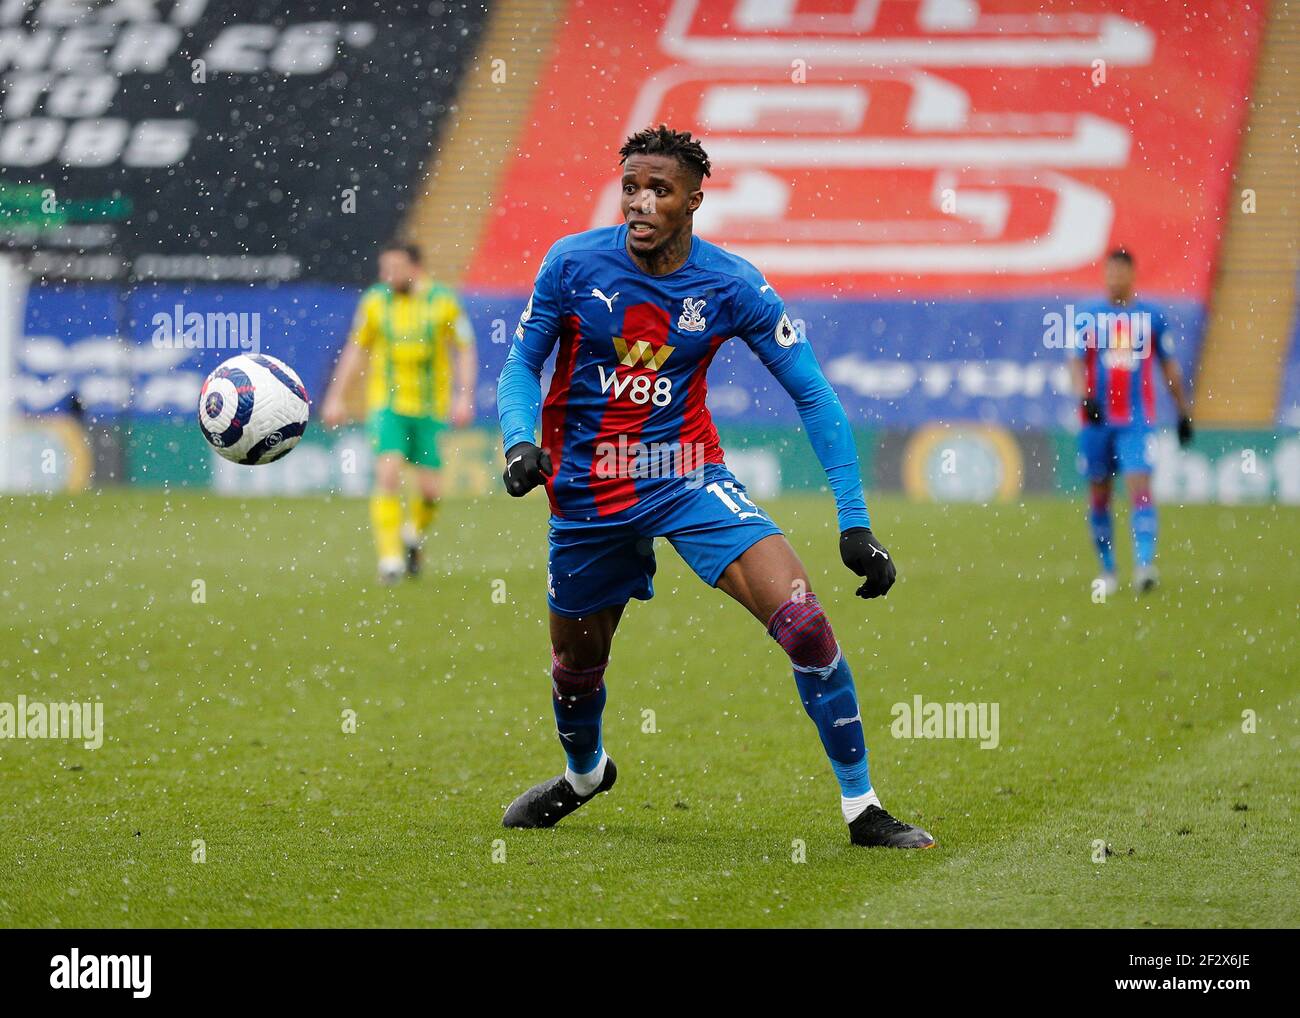 10/13 marzo 2021; Selhurst Park, Londra, Inghilterra; Premier League Football inglese, Crystal Palace contro West Bromwich Albion; Wilfried Zaha del Crystal Palace Foto Stock